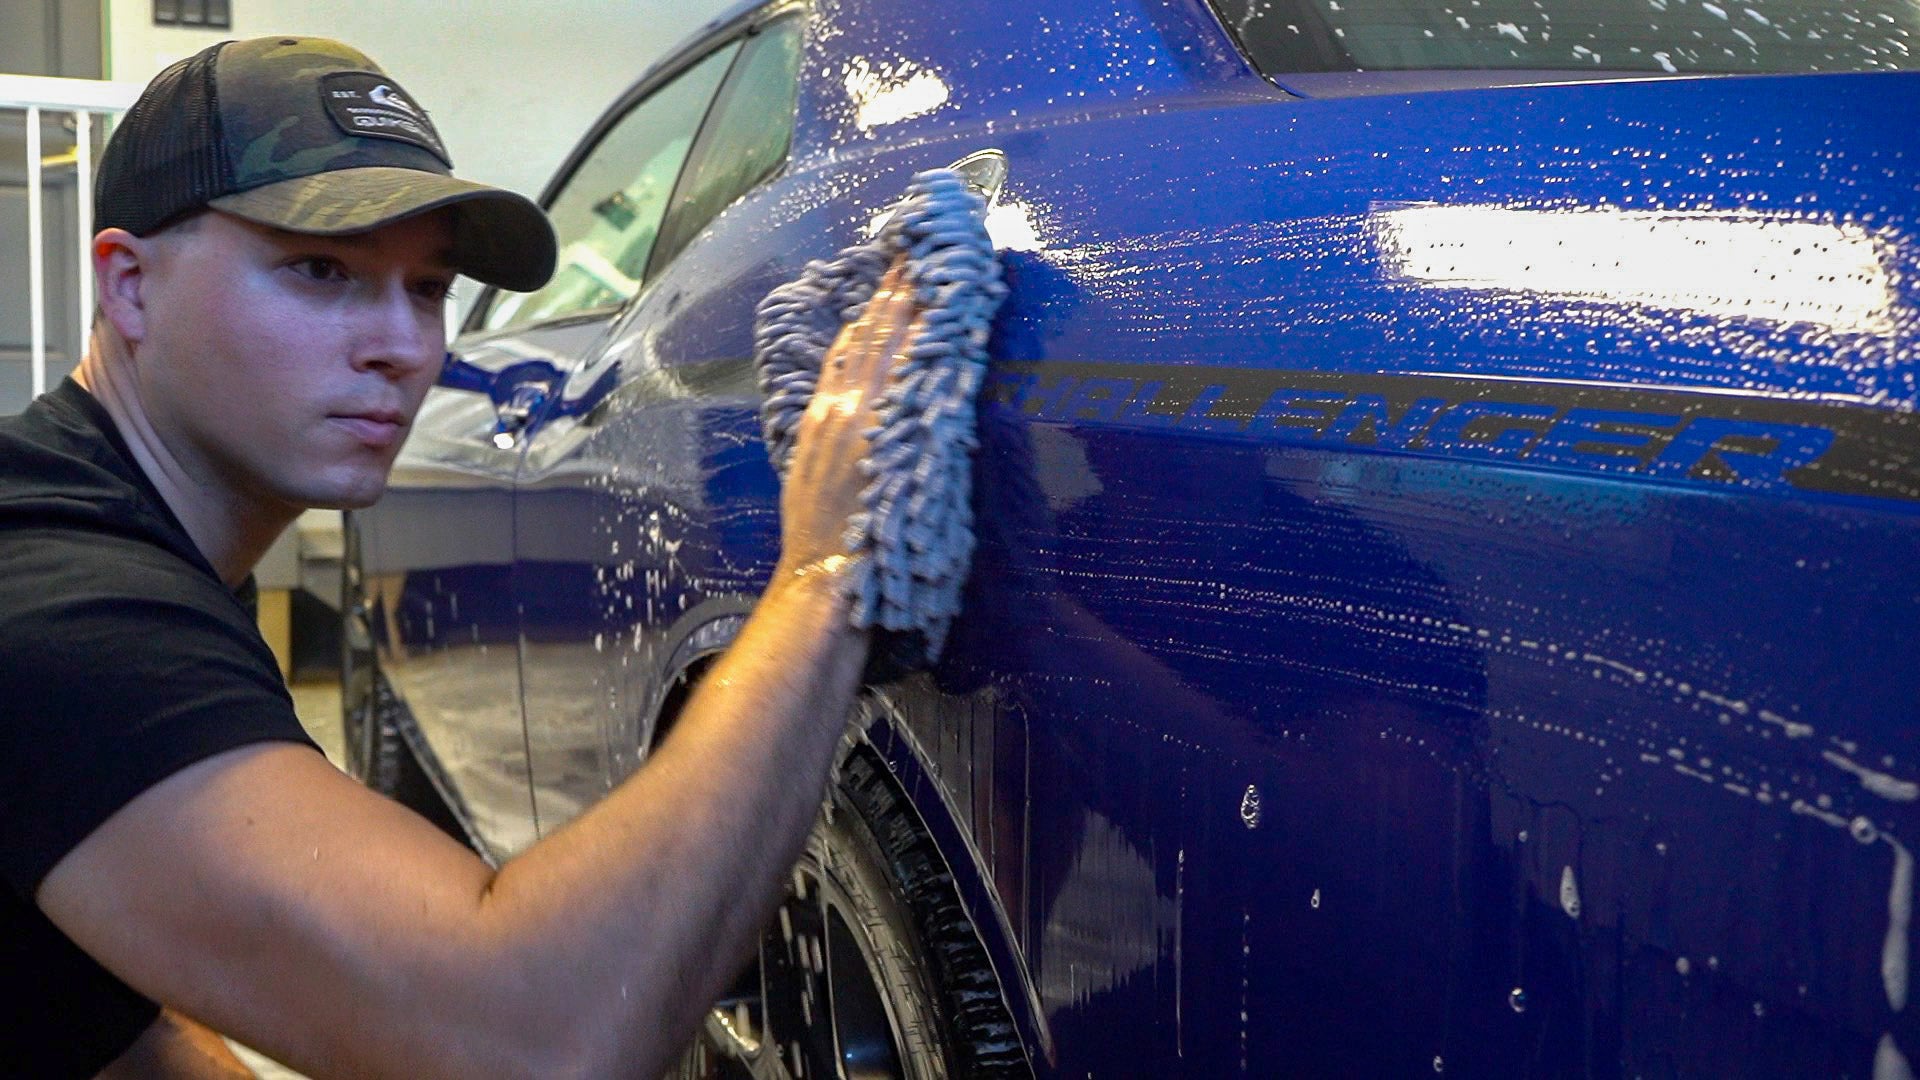 Geek Center - Auto Detailing Tips - Wash Away The Winter With CARPRO Reset  